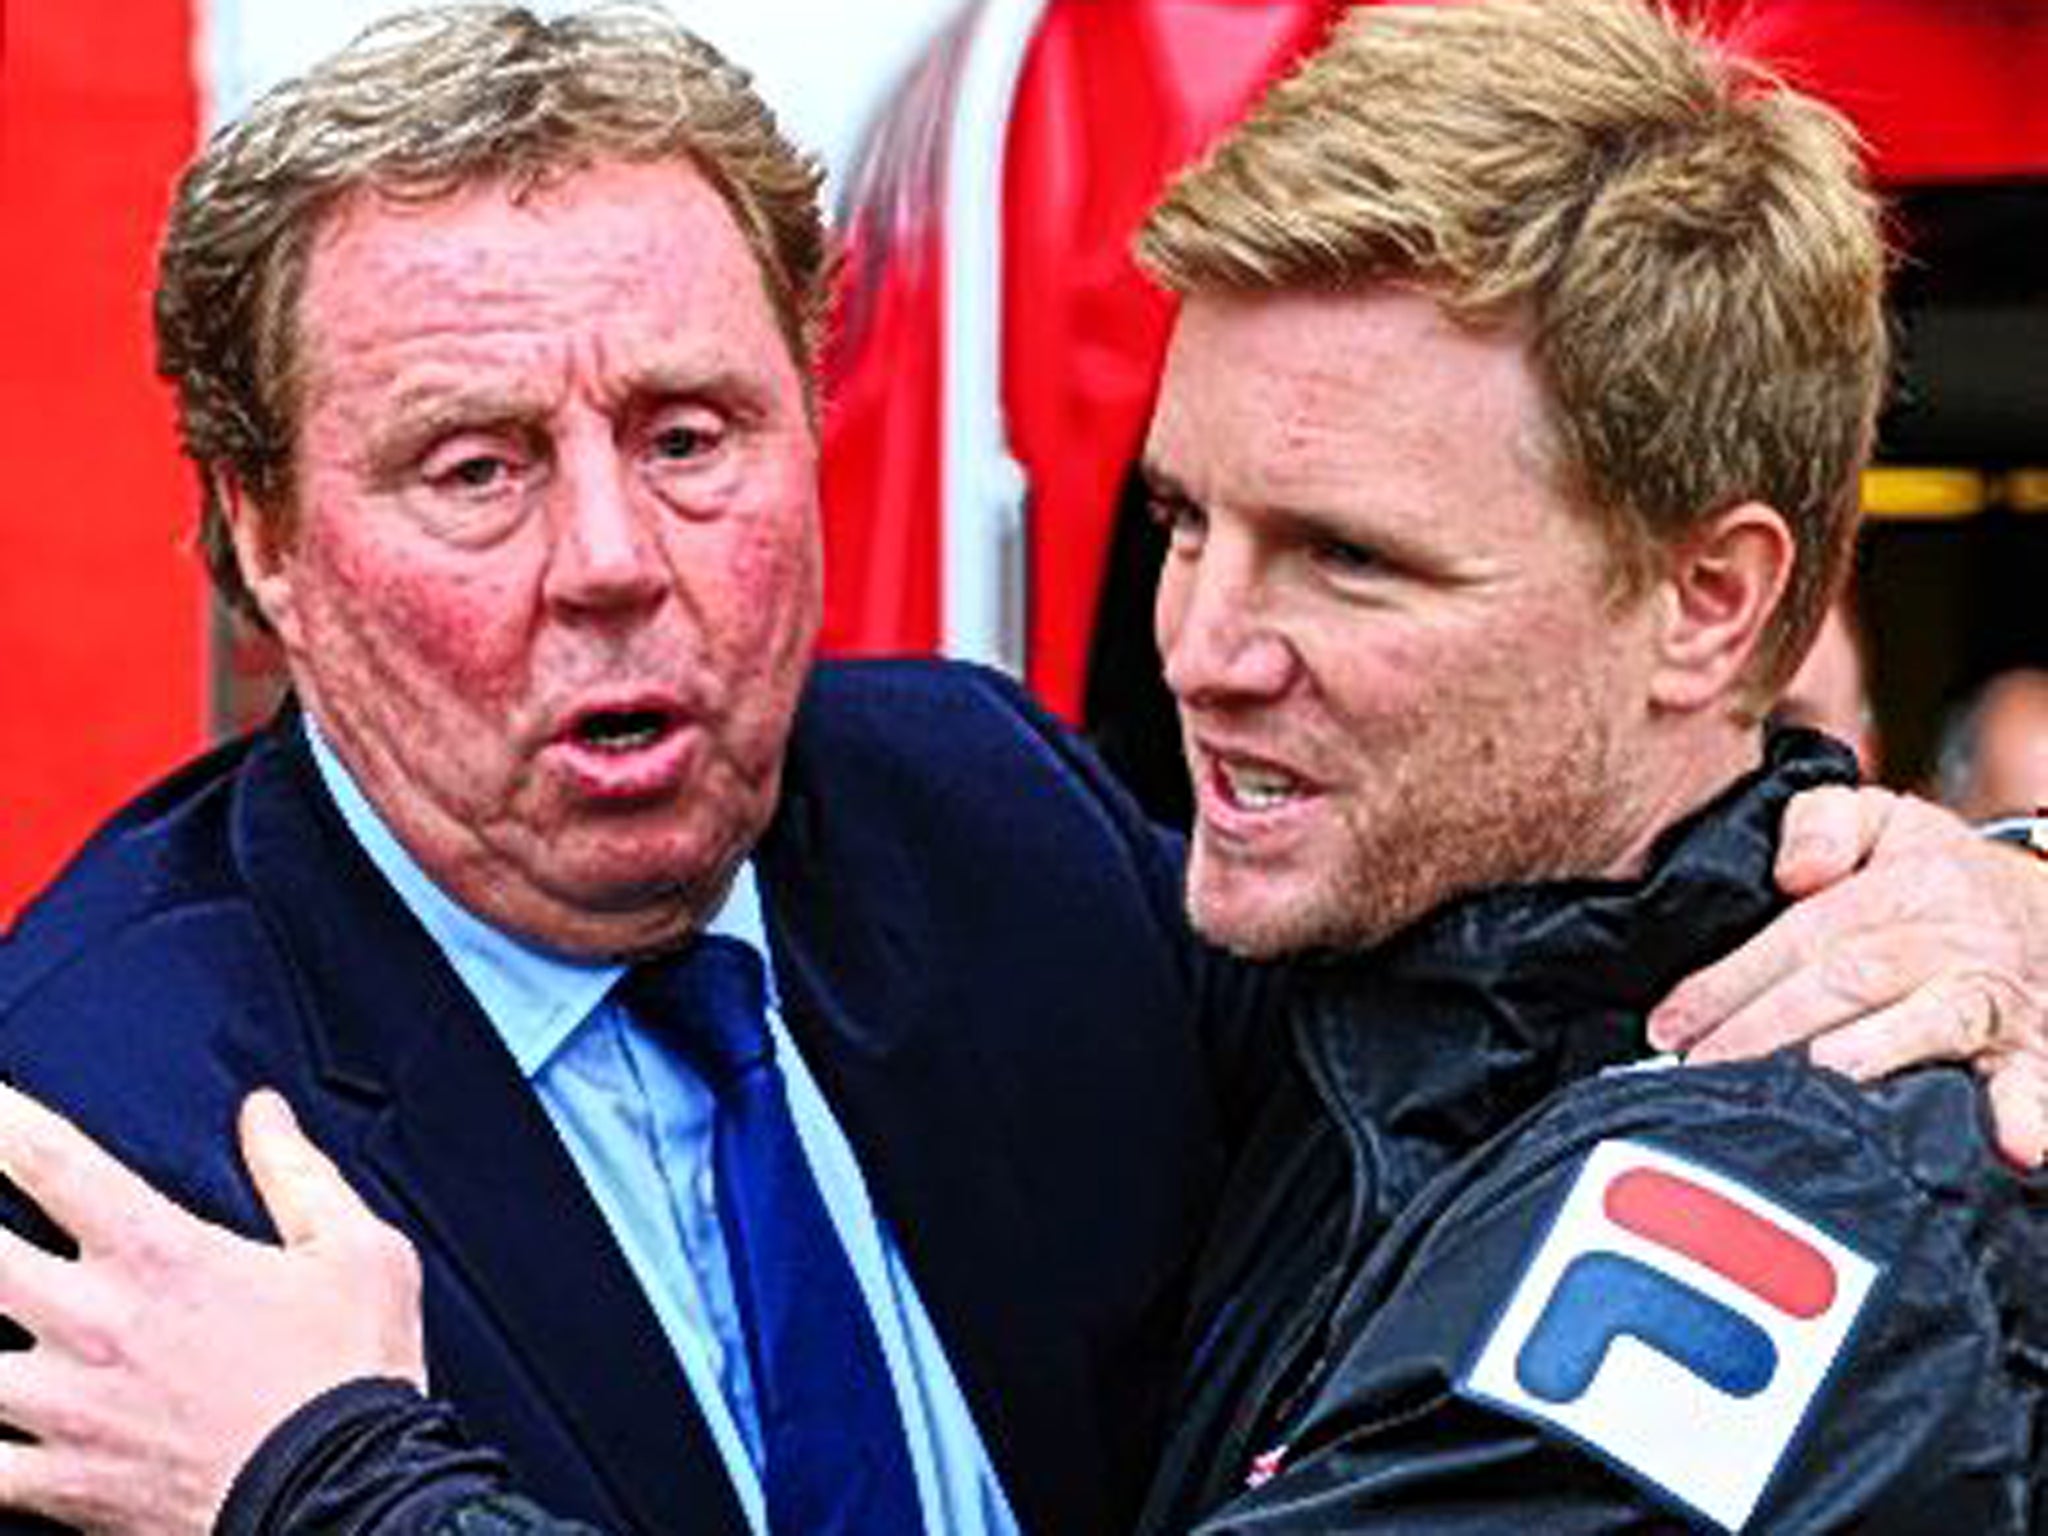 Huggy pair: Harry Redknapp embraces Bournemouth manager Eddie Howe